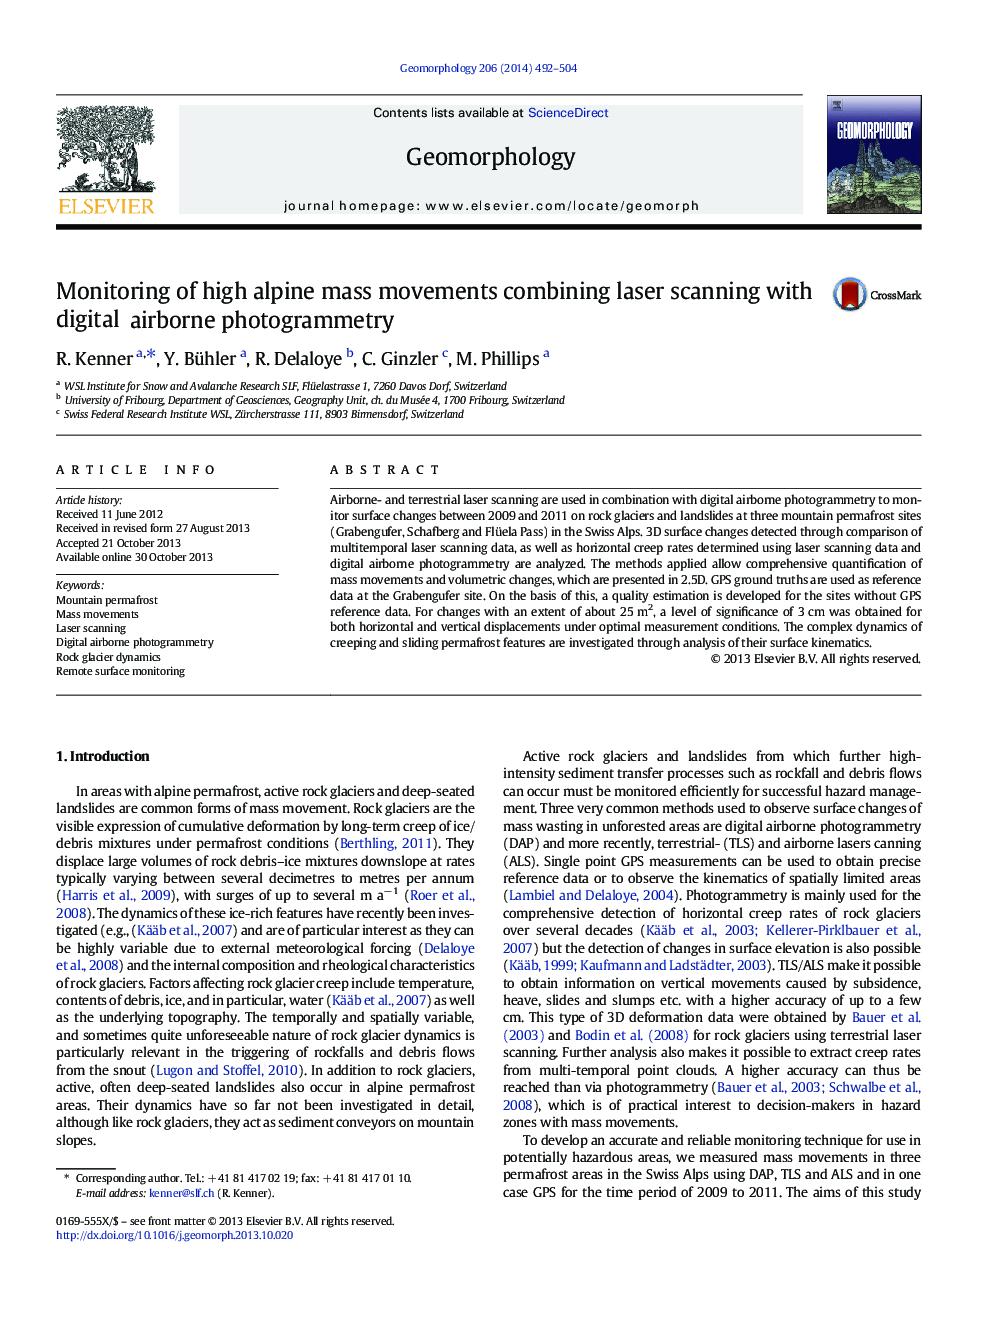 Monitoring of high alpine mass movements combining laser scanning with digital airborne photogrammetry